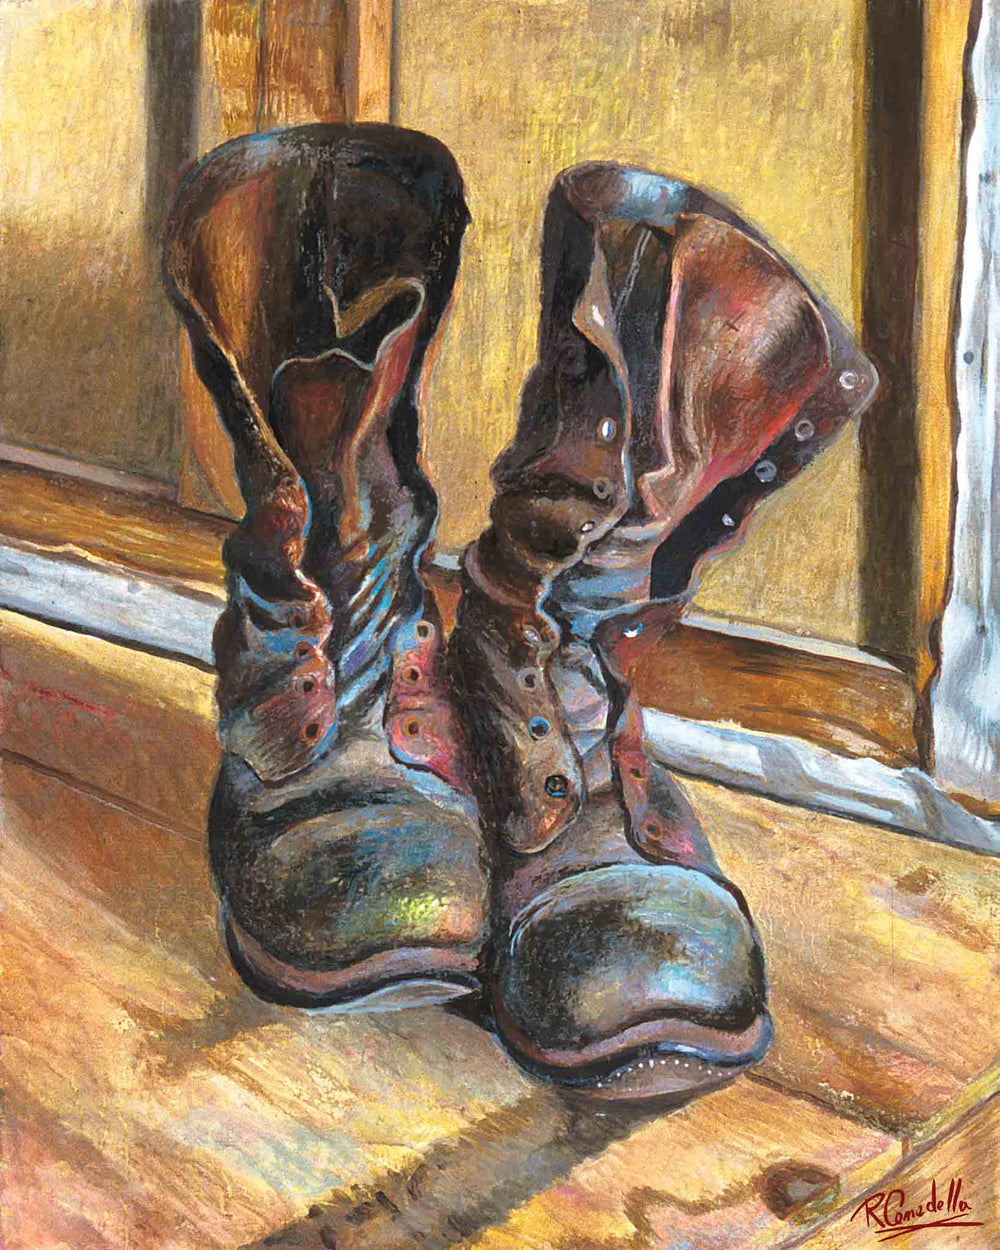 Bob Bolle's Boots